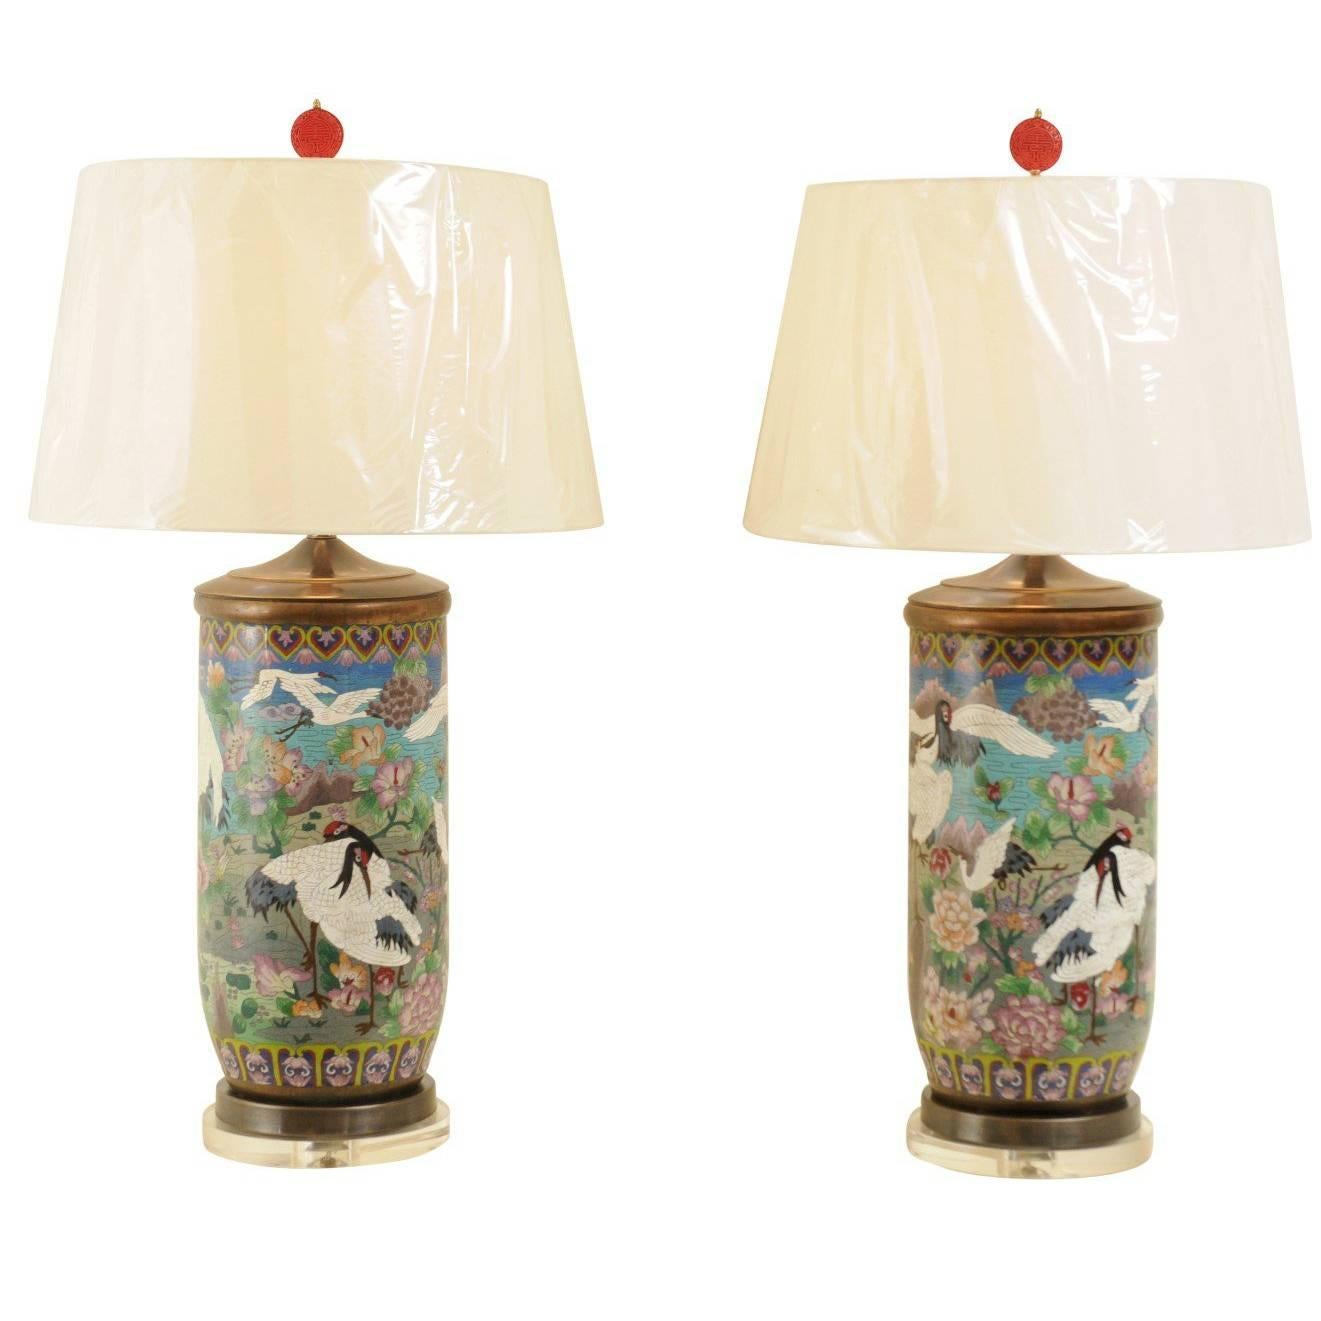  Jaw-Dropping Pair of Cloisonne Vessels as Custom Lamps